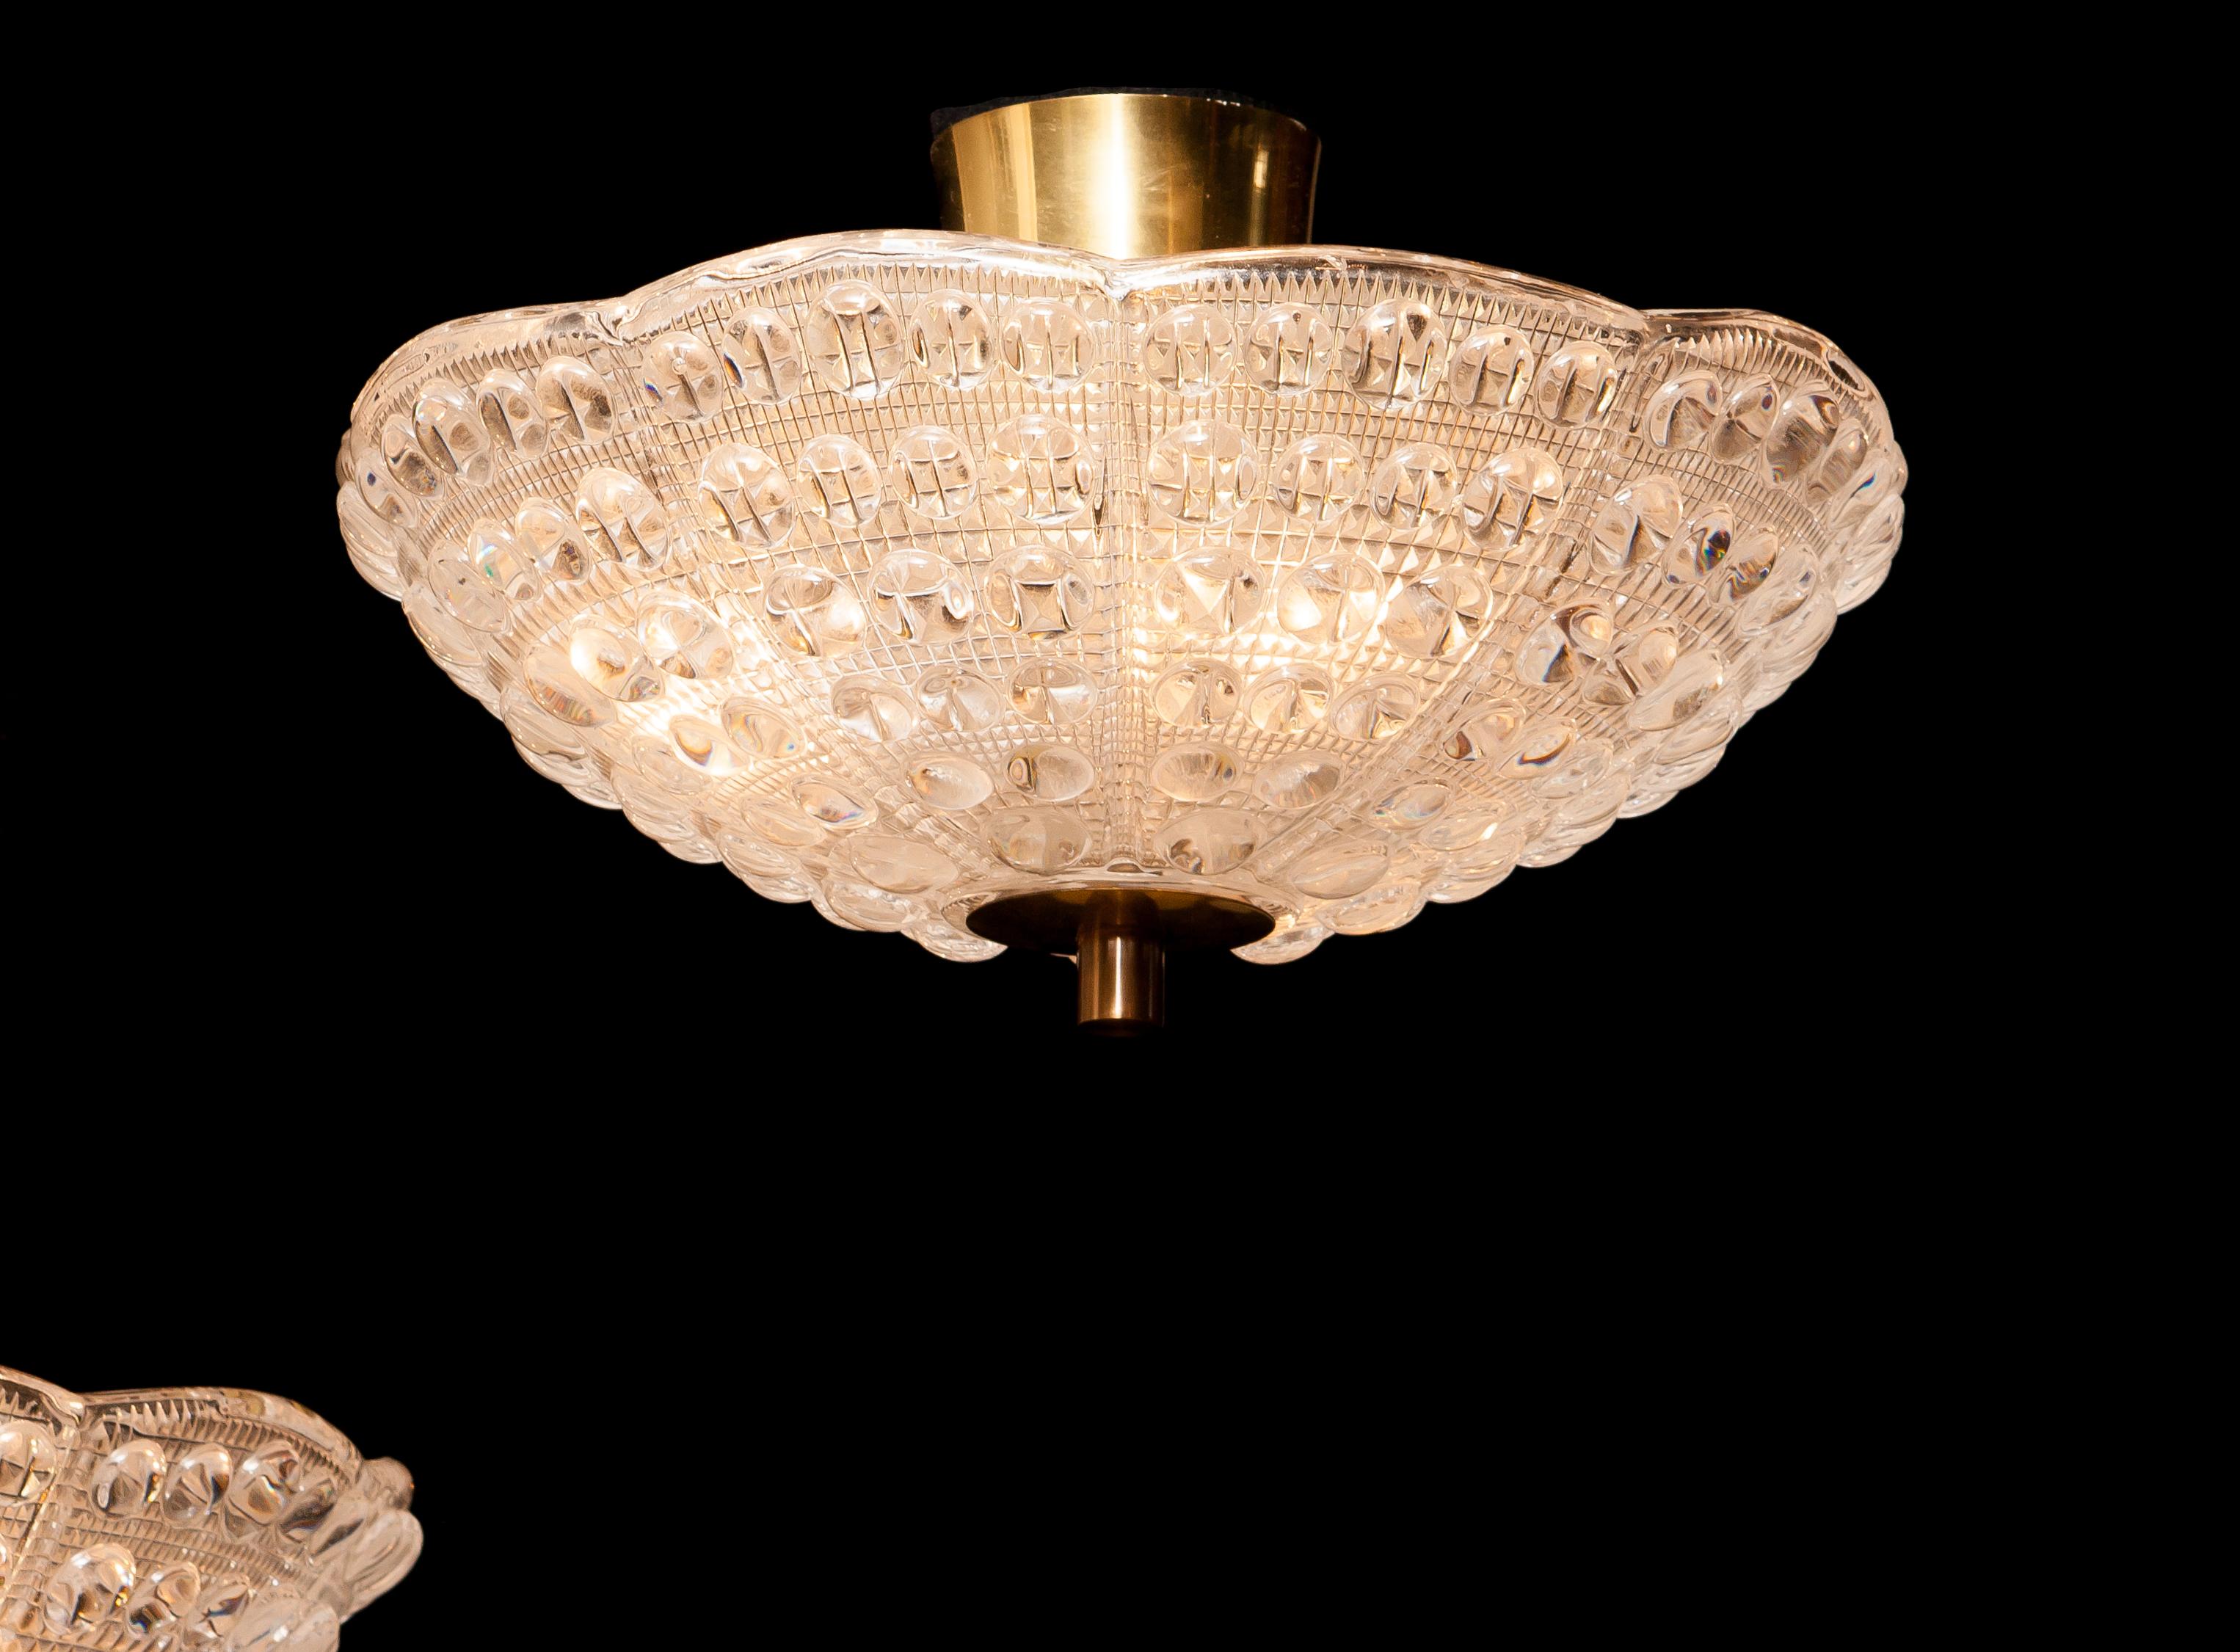 Pair of Crystal and Brass Ceiling Lights by Carl Fagerlund for Orrefors, 1960s (Mitte des 20. Jahrhunderts)